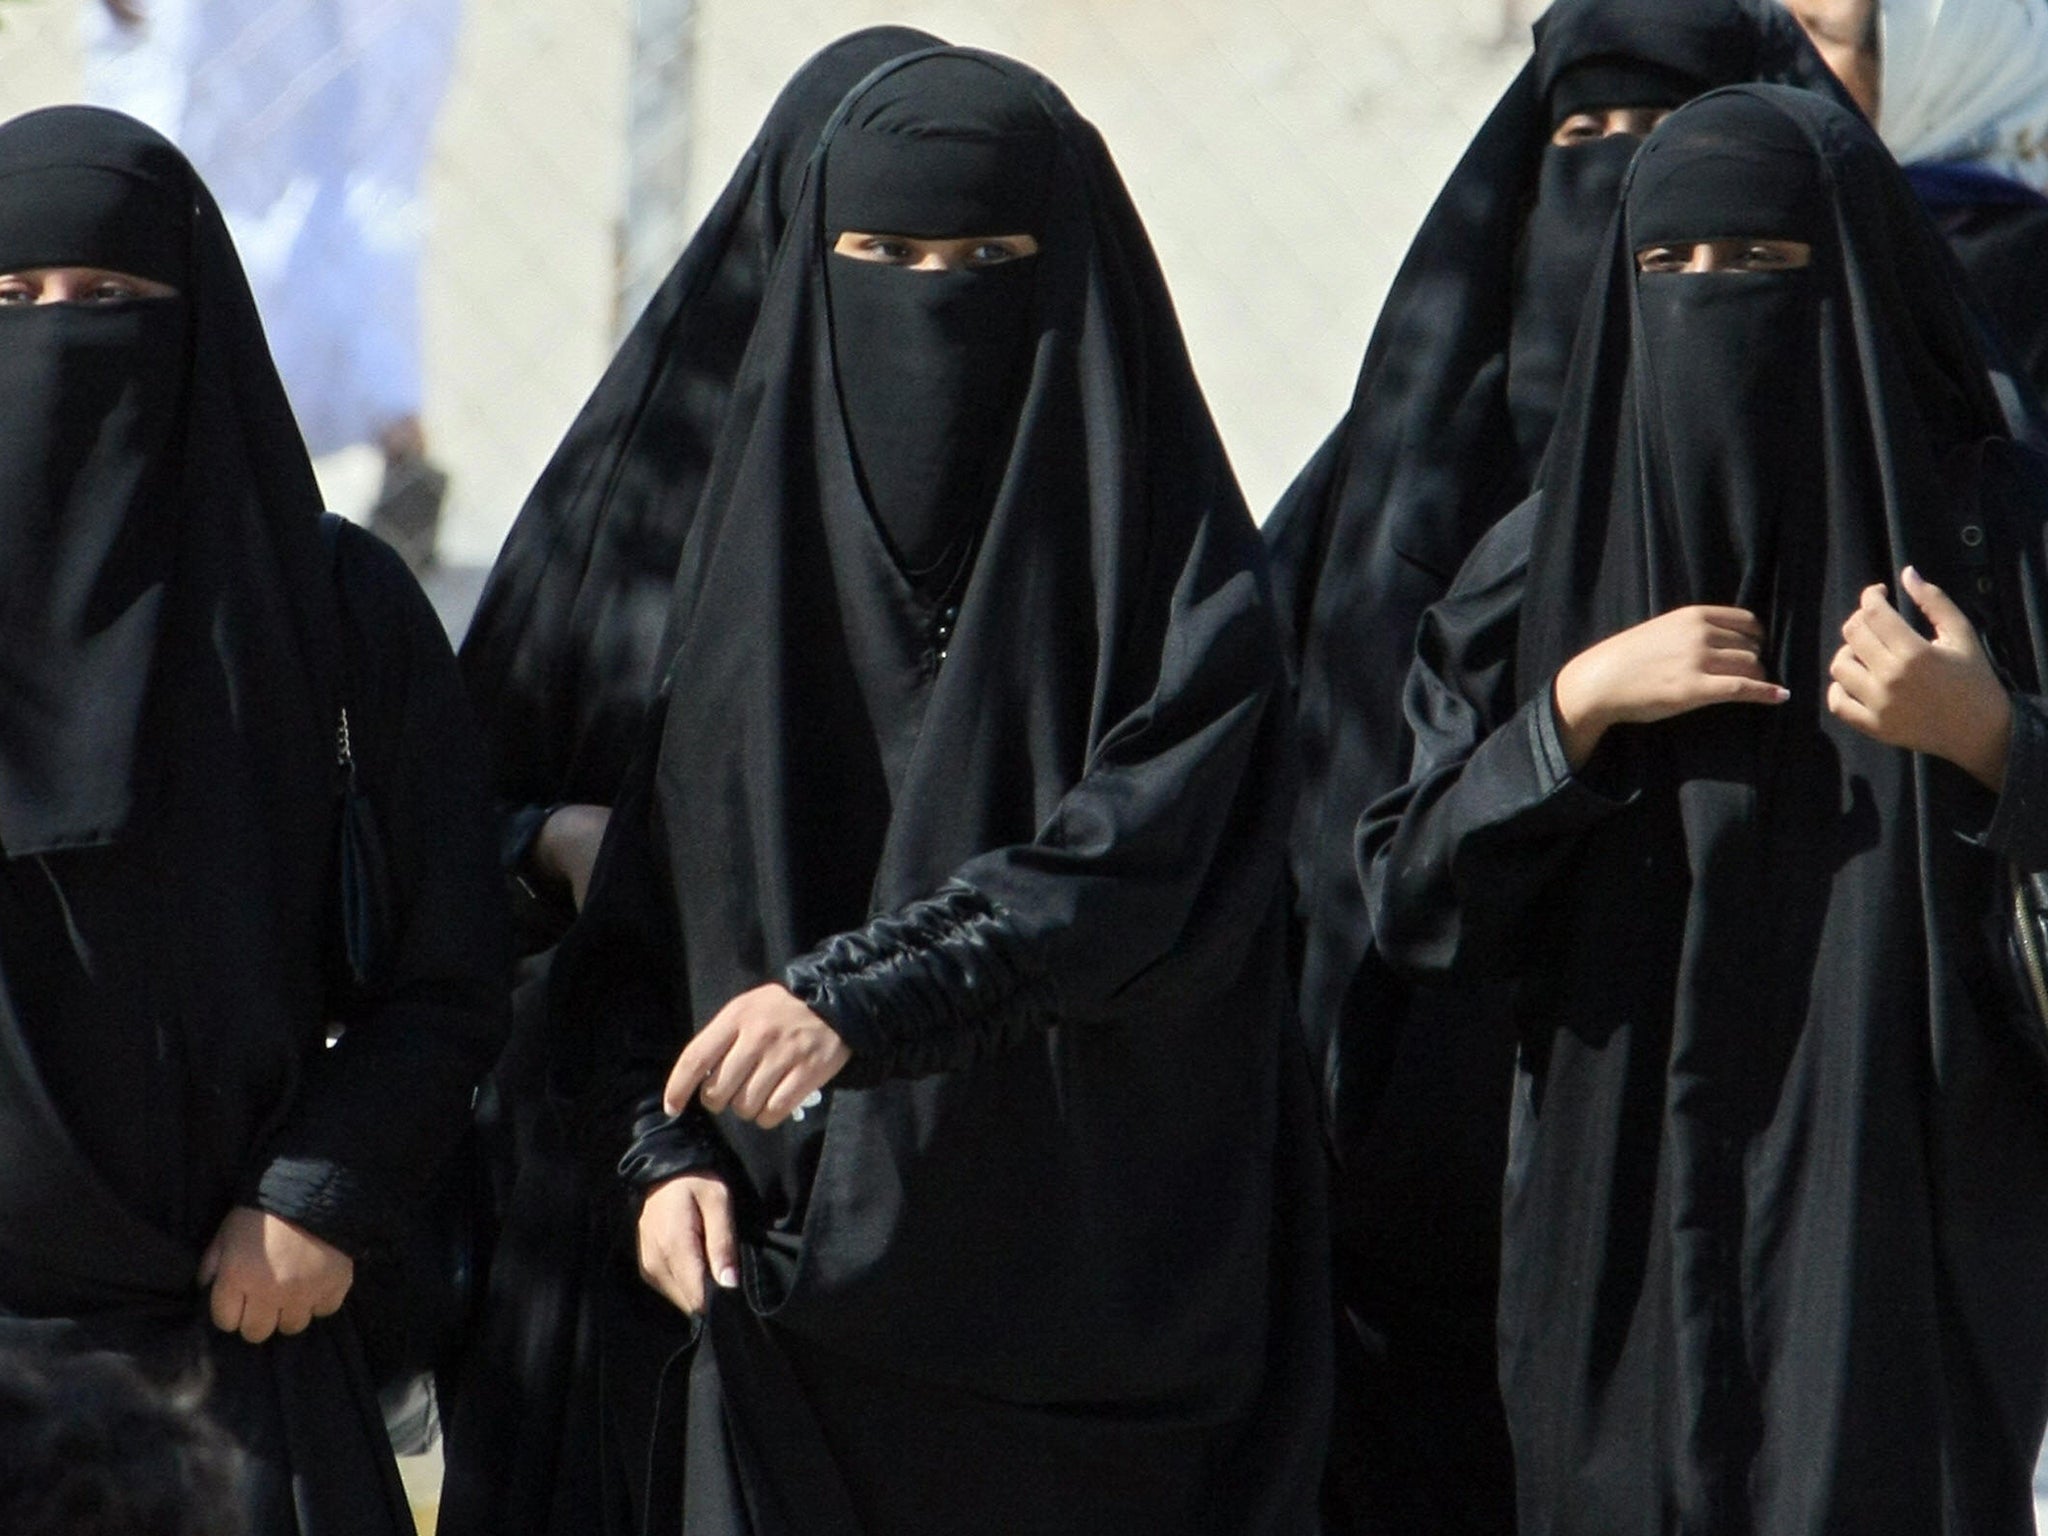 Saudi Arabian women finally allowed to apply for passport and travel independently The Independent The Independent photo pic photo